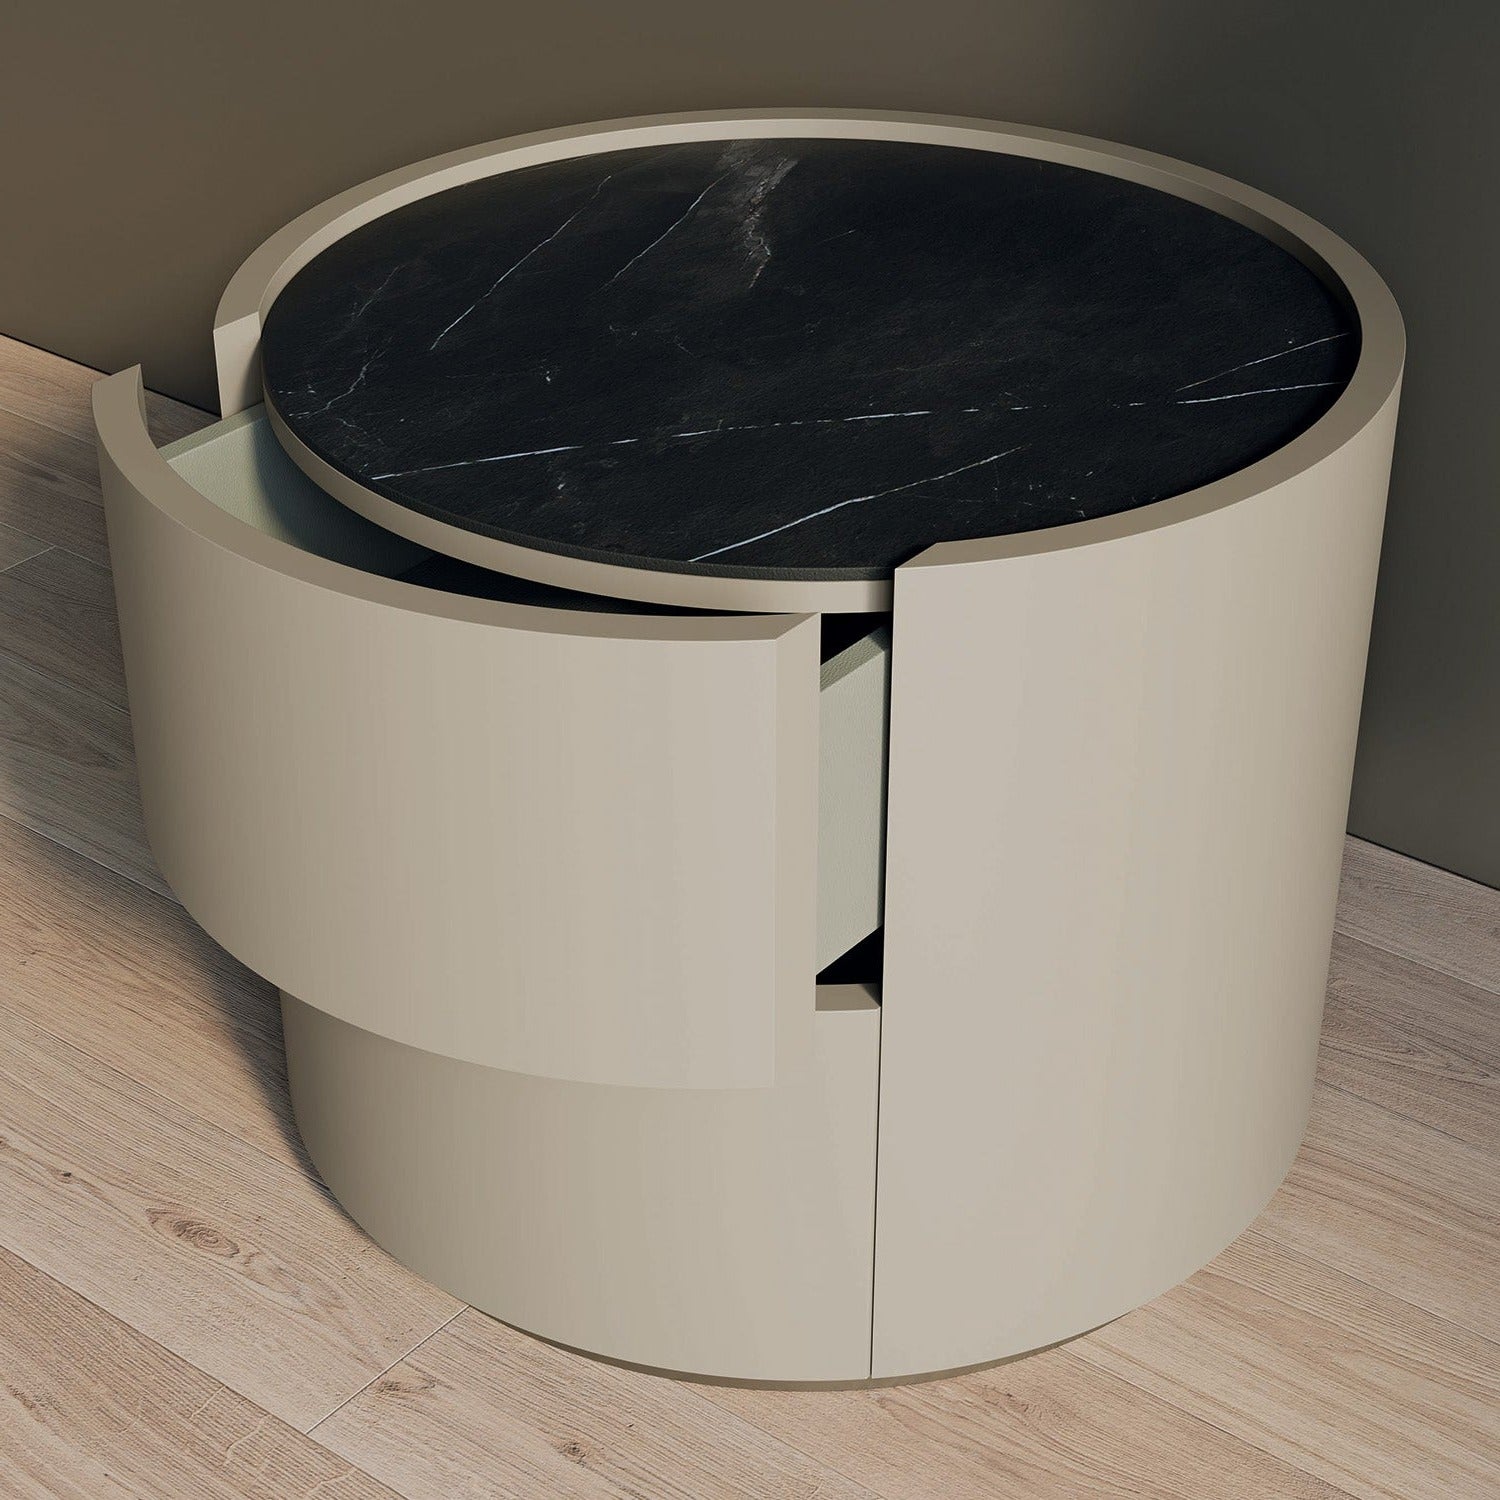 Ronda bedside table by Dall'Agnese